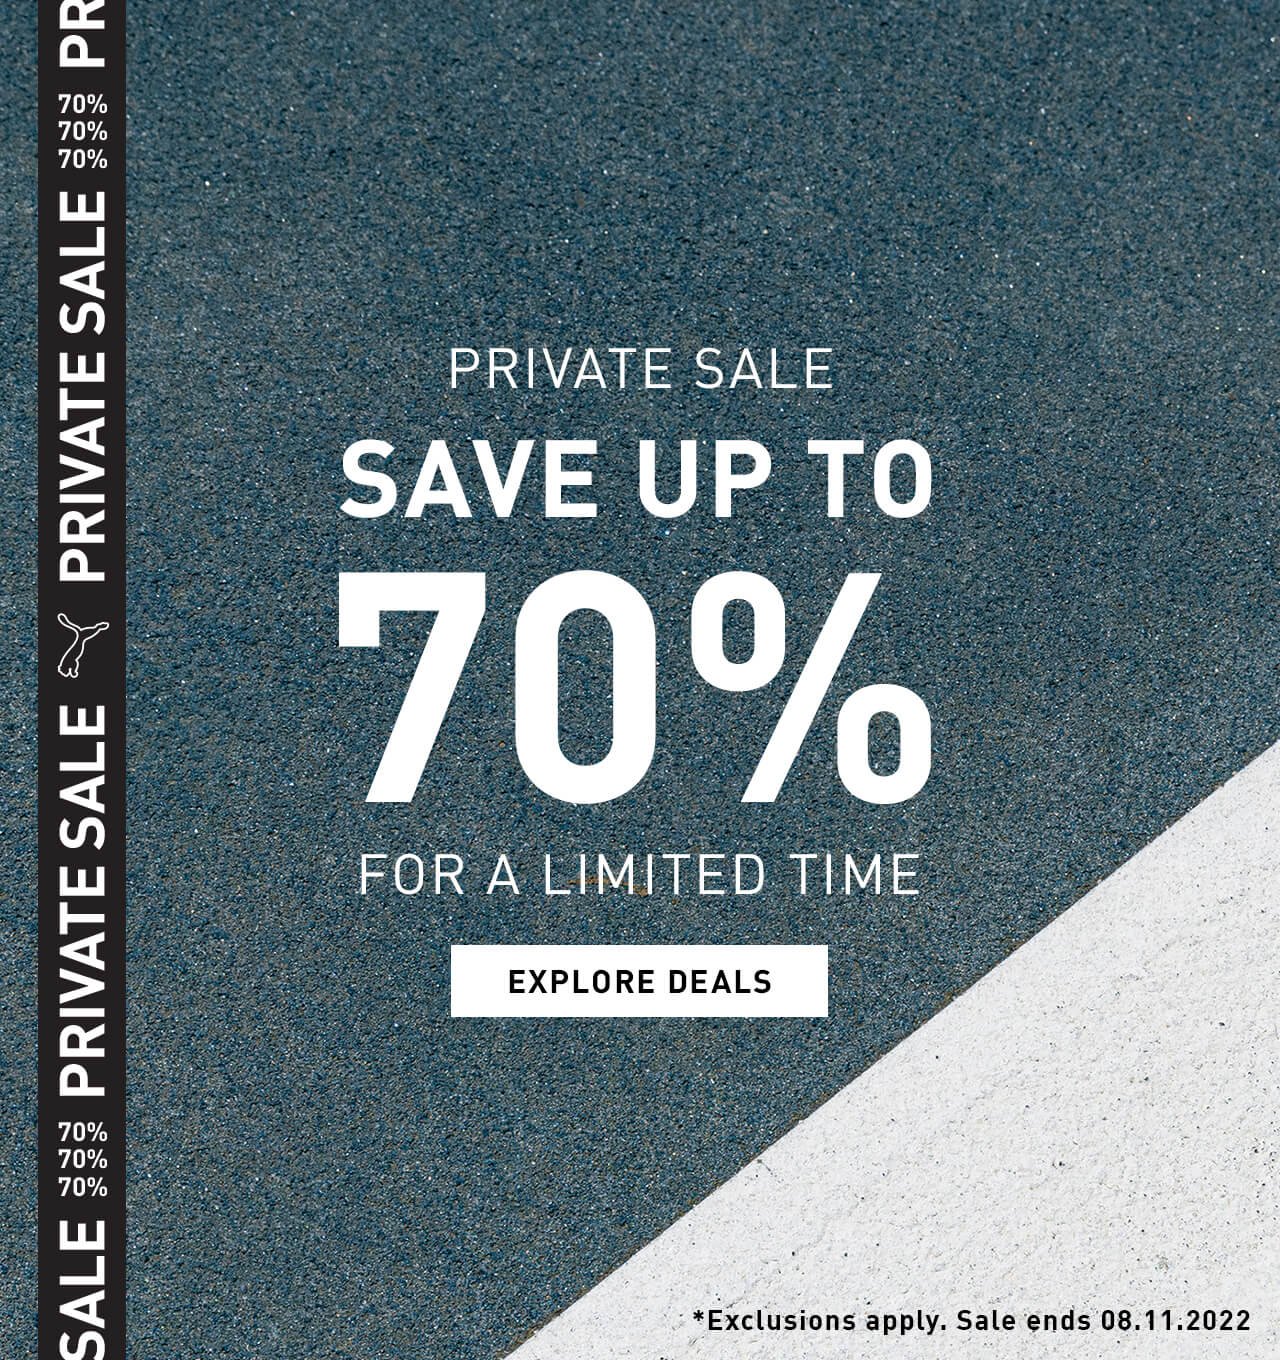 PRIVATE SALE | SAVE UP TO 70% FOR A LIMITED TIME | EXPLORE DEALS | *Exclusions apply. Sale ends 08.11.2022